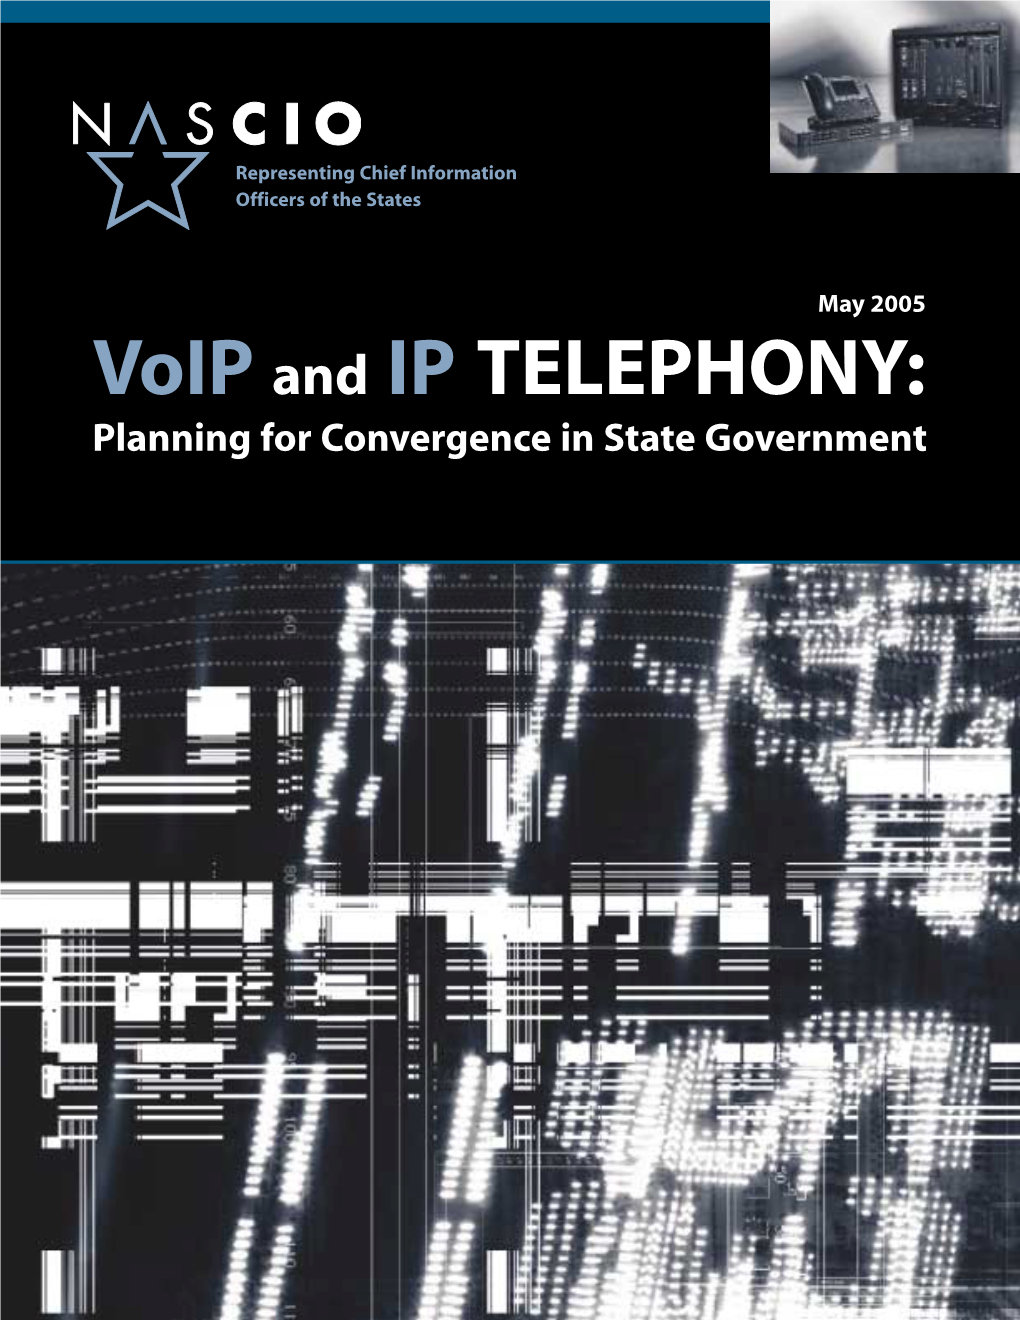 Voip and IP TELEPHONY: Planning for Convergence in State Government Representing Chief Information Officers of the States